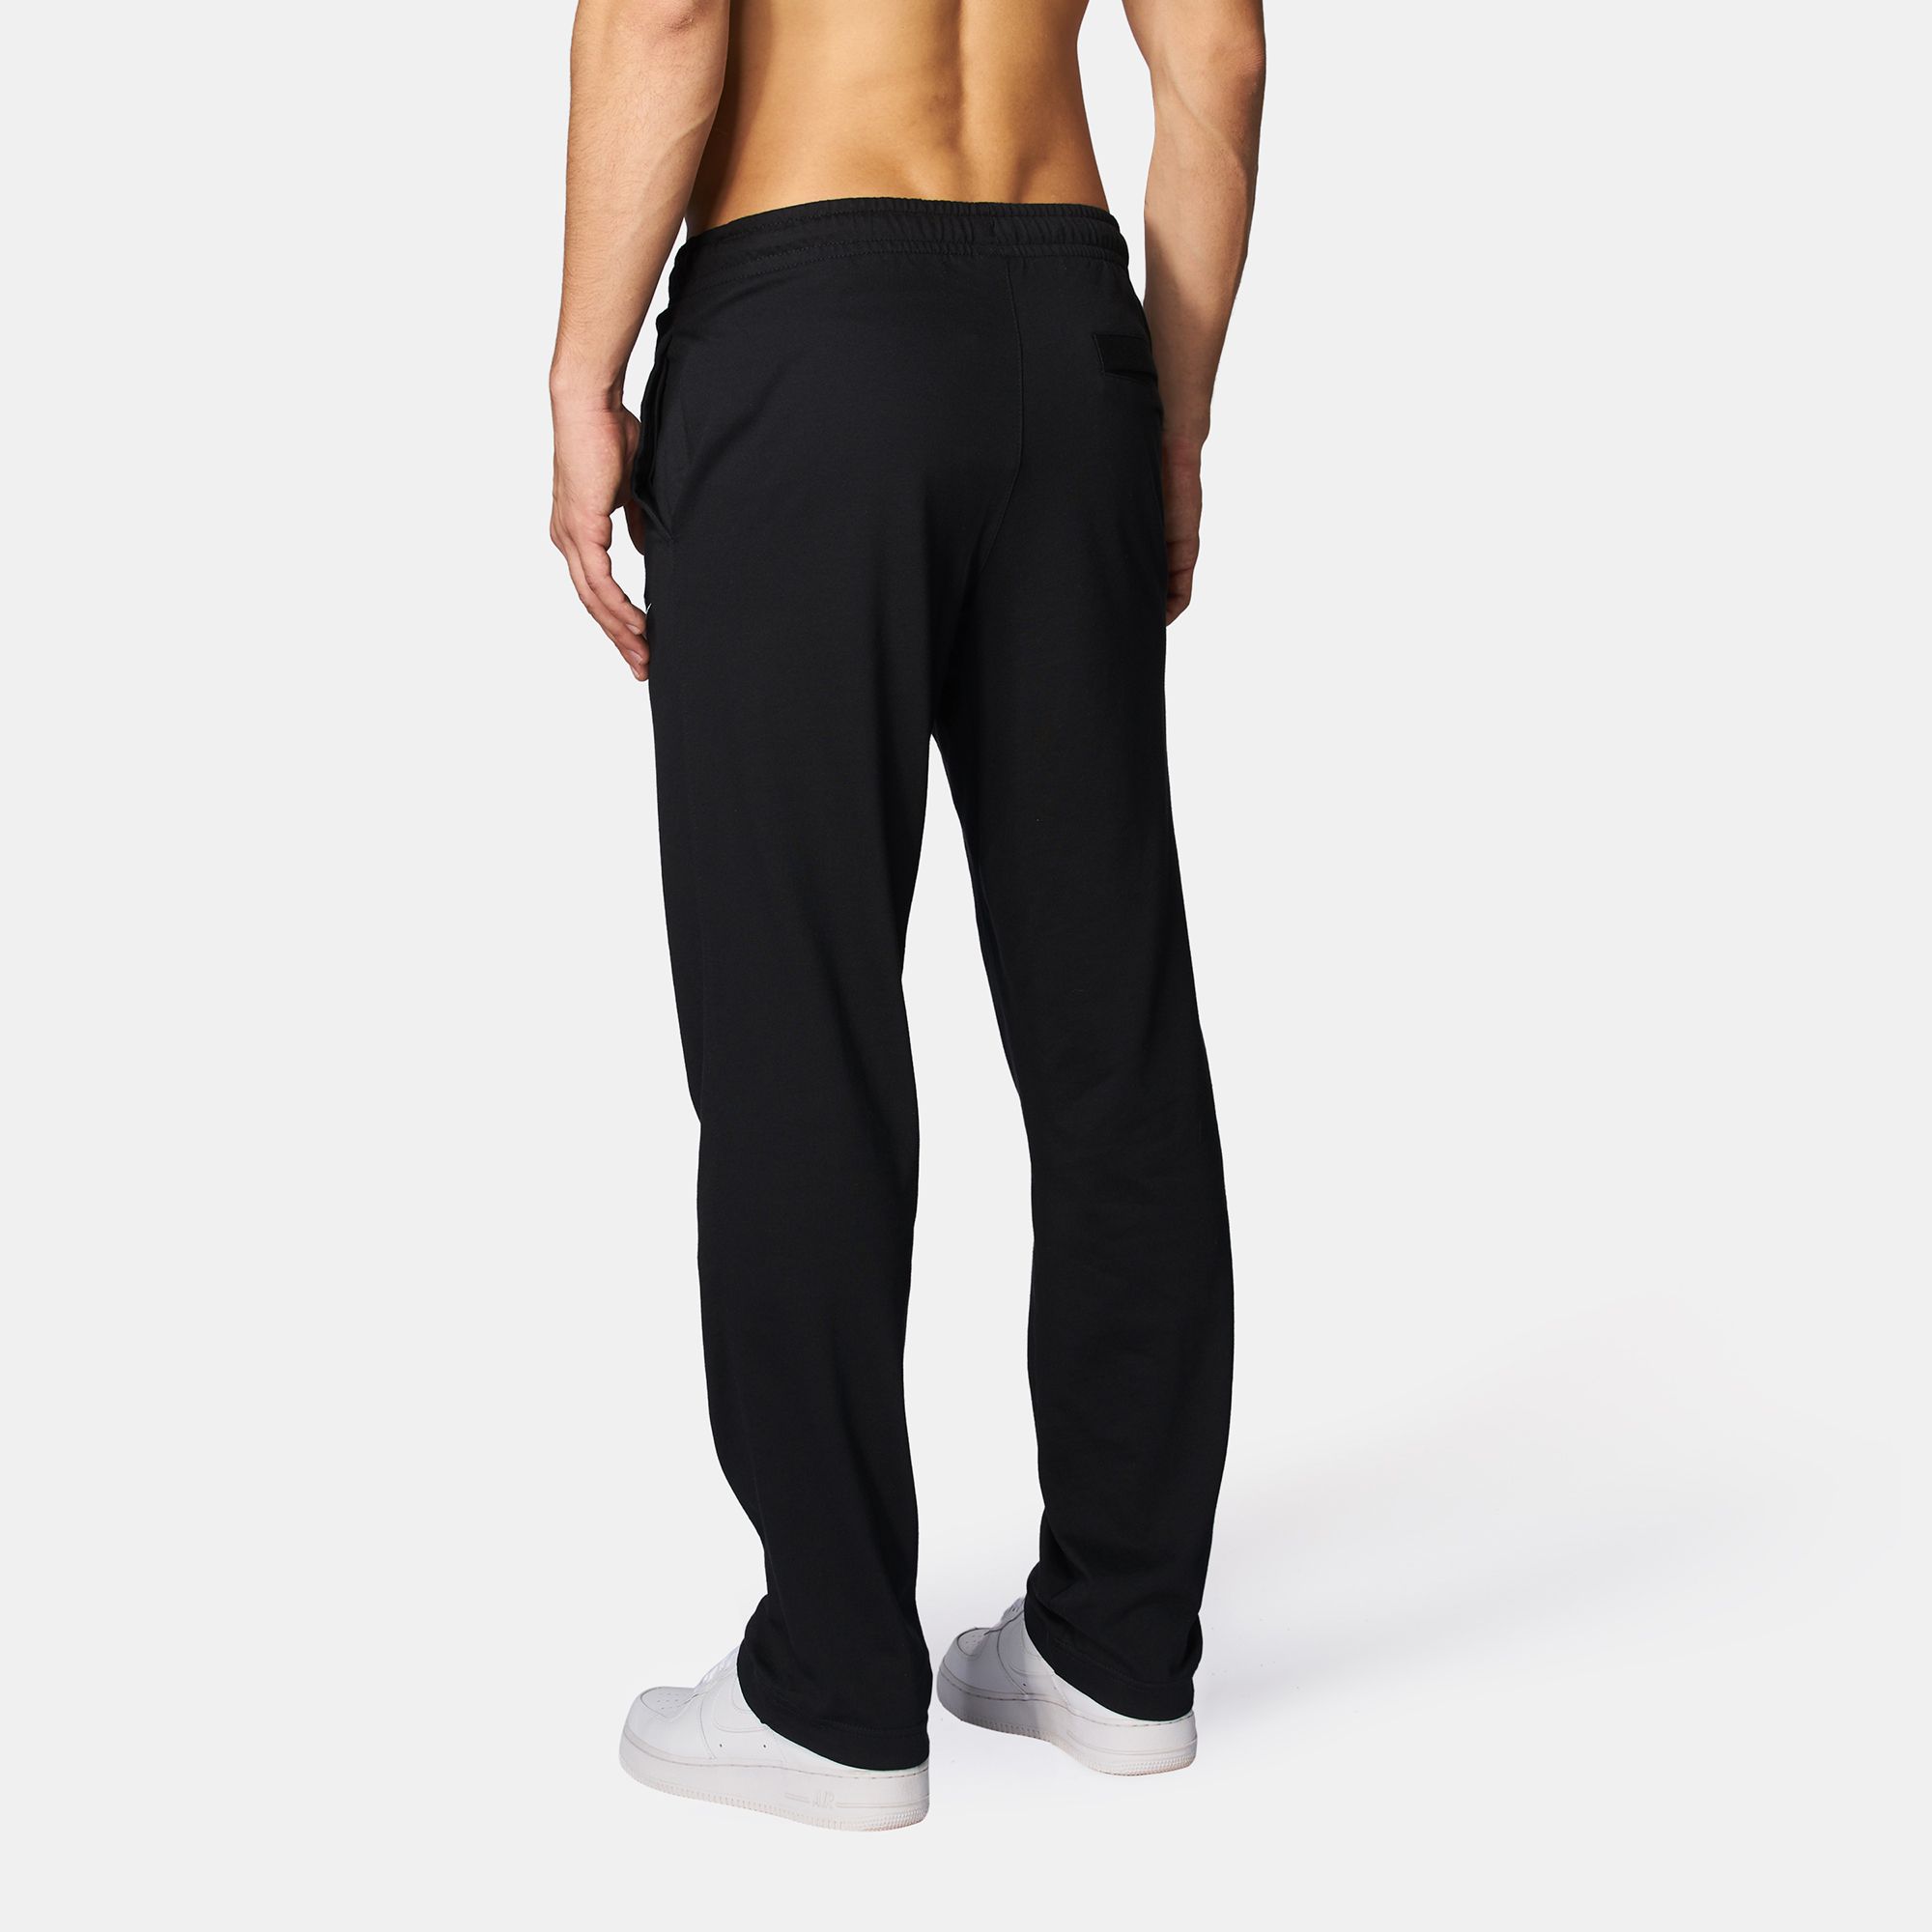 Shop Black Nike Jersey Club OH Sweat Pant for Mens by Nike | SSS